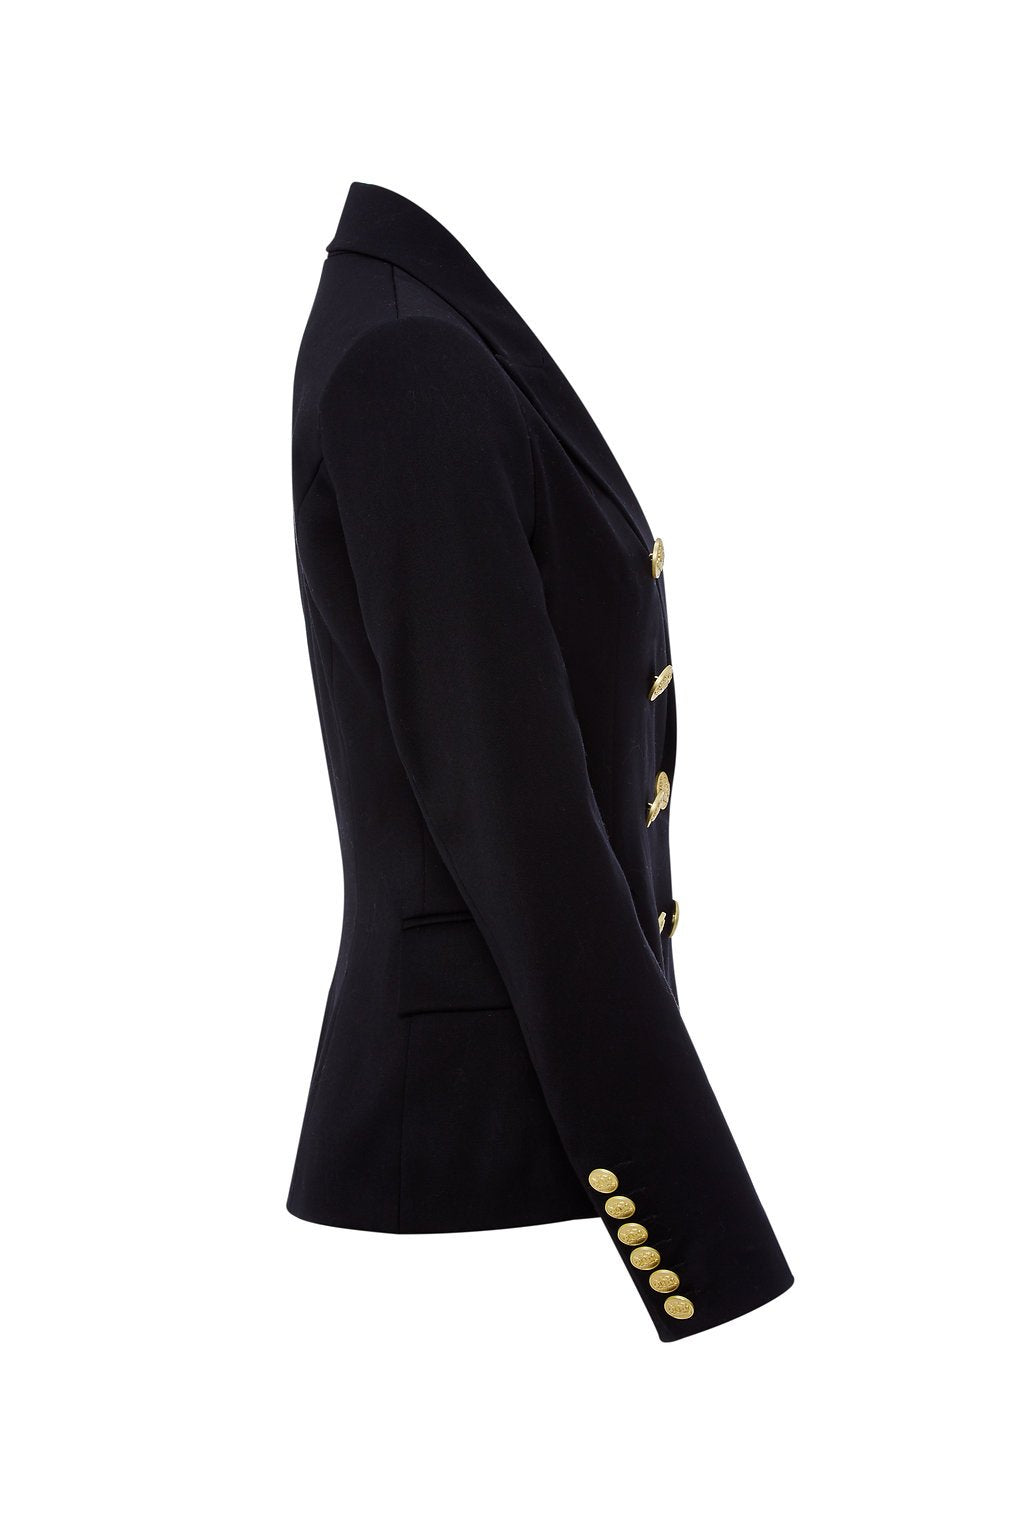 side of British made double breasted blazer that fastens with a single button hole to create a more form fitting silhouette with two pockets and gold button detailing this blazer is made from black barathea